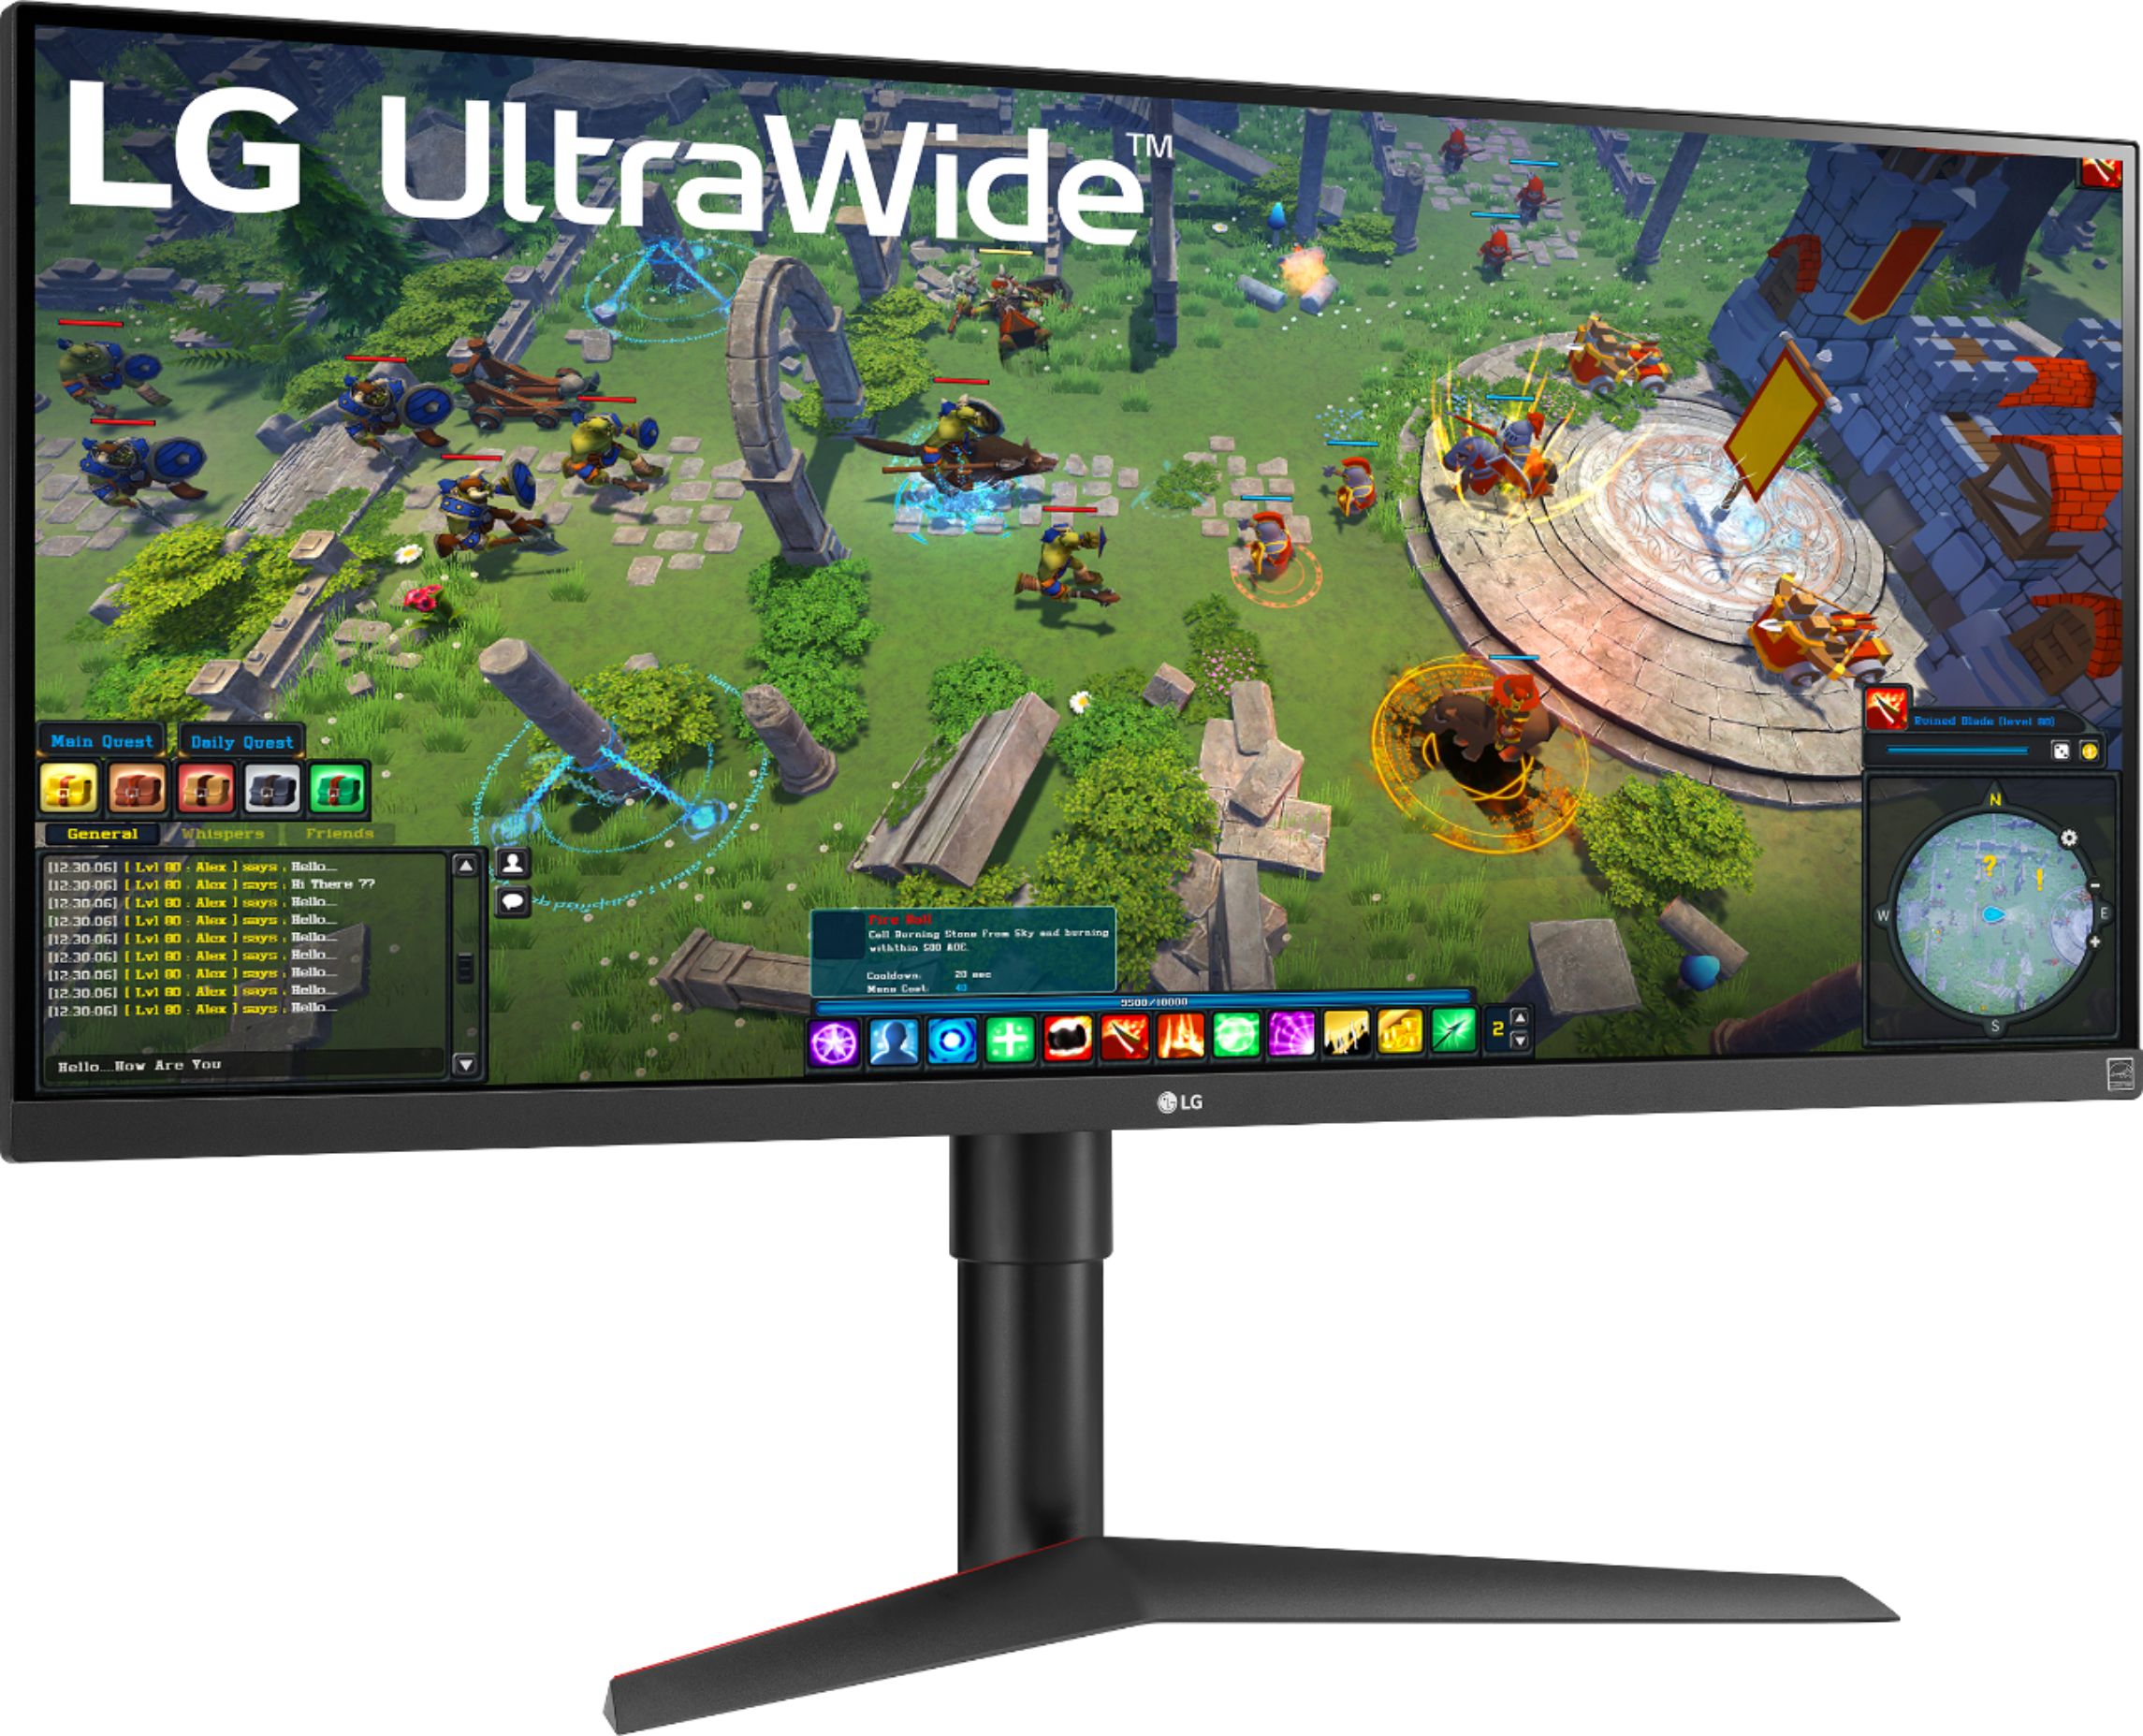 Angle View: LG - Geek Squad Certified Refurbished 34" IPS LED UltraWide FreeSync Monitor with HDR - Black